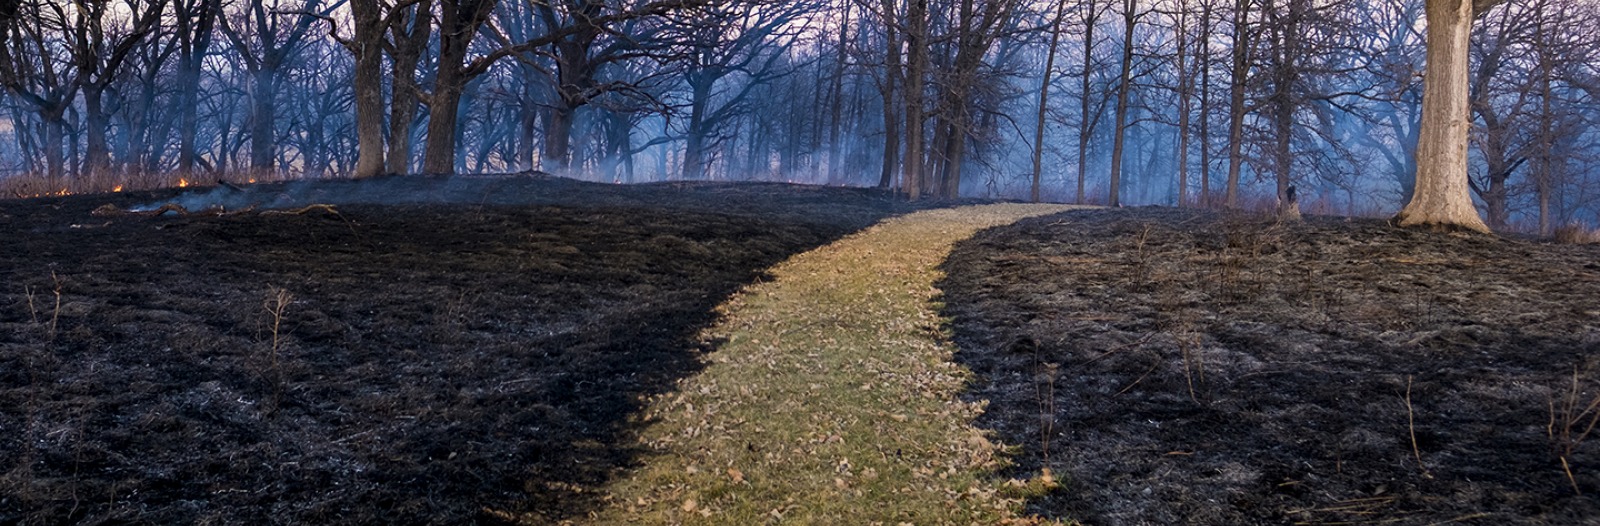 A grassy path winds through recently burned prairie and trees.